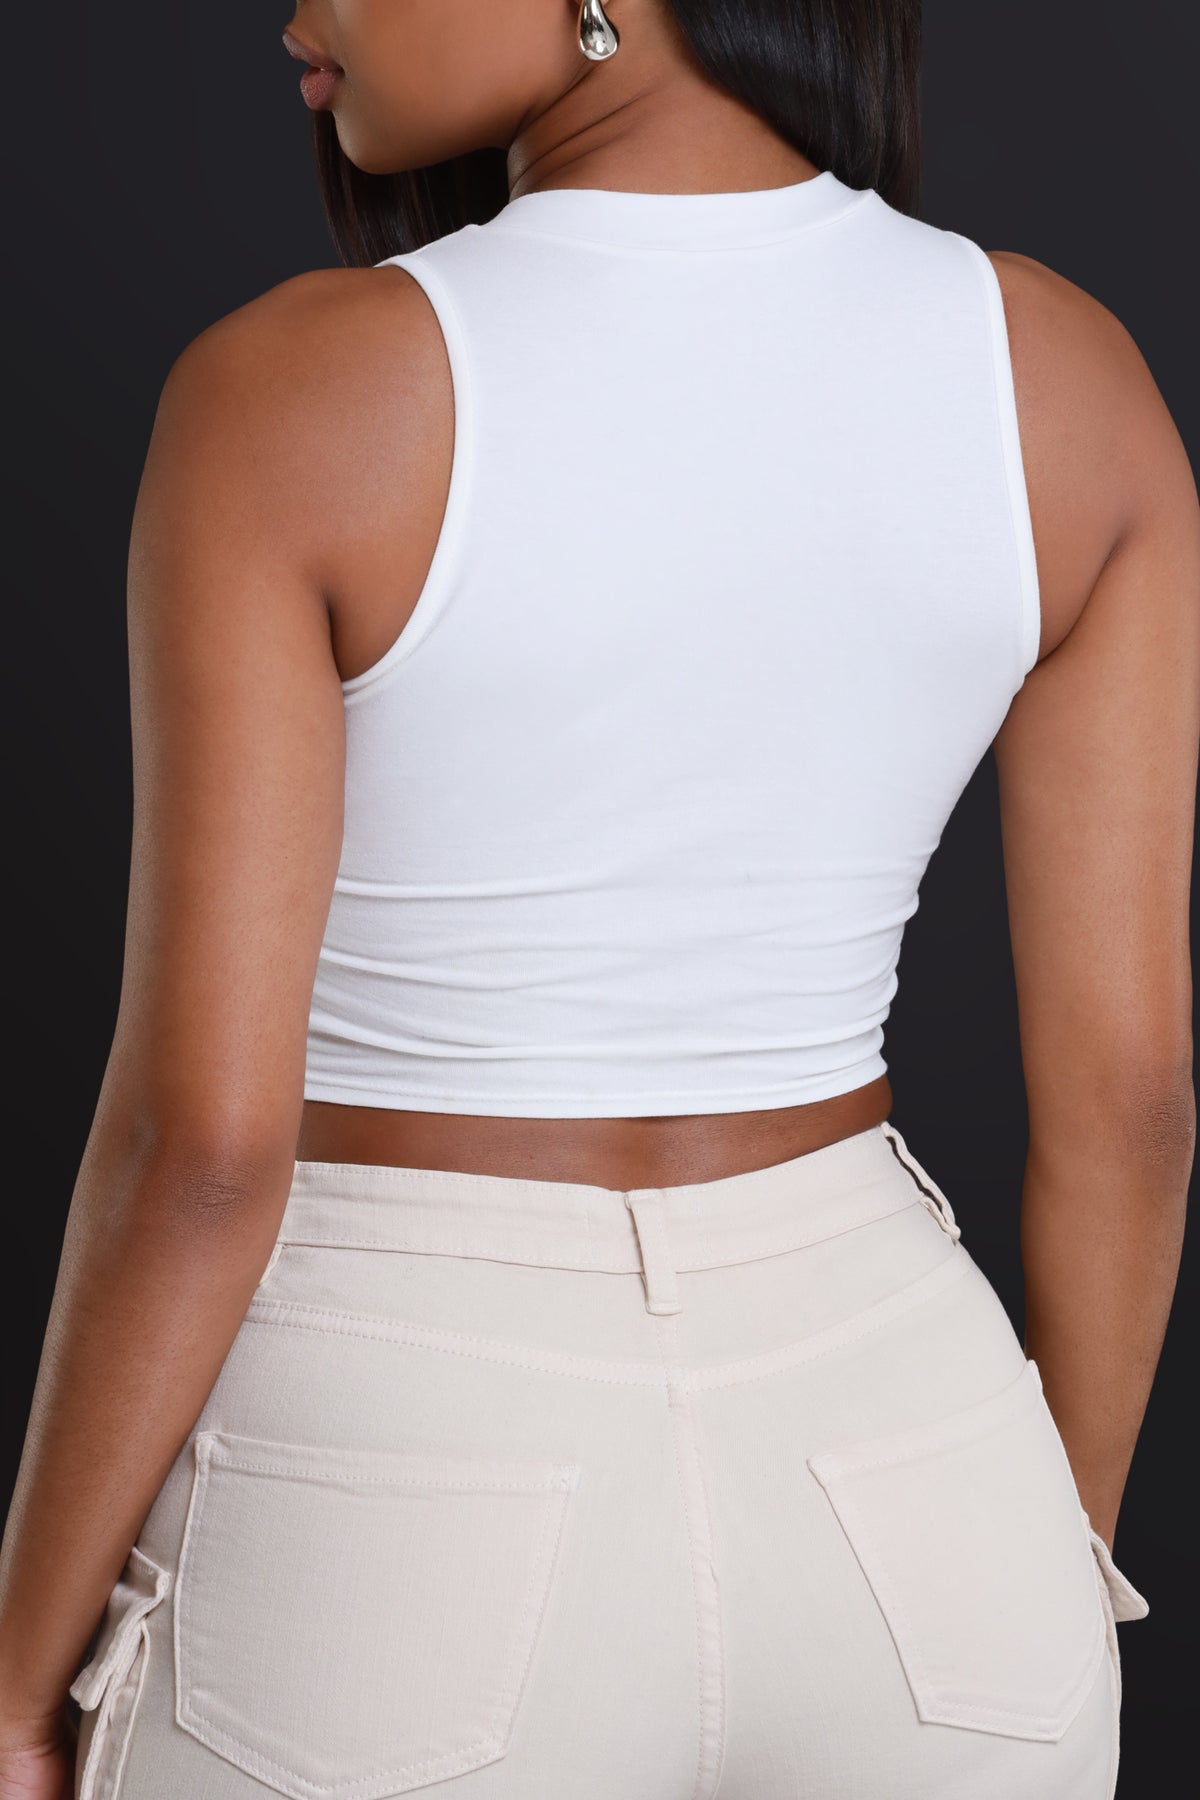 
              Way Of Life Graphic Crop Top - White - Swank A Posh
            